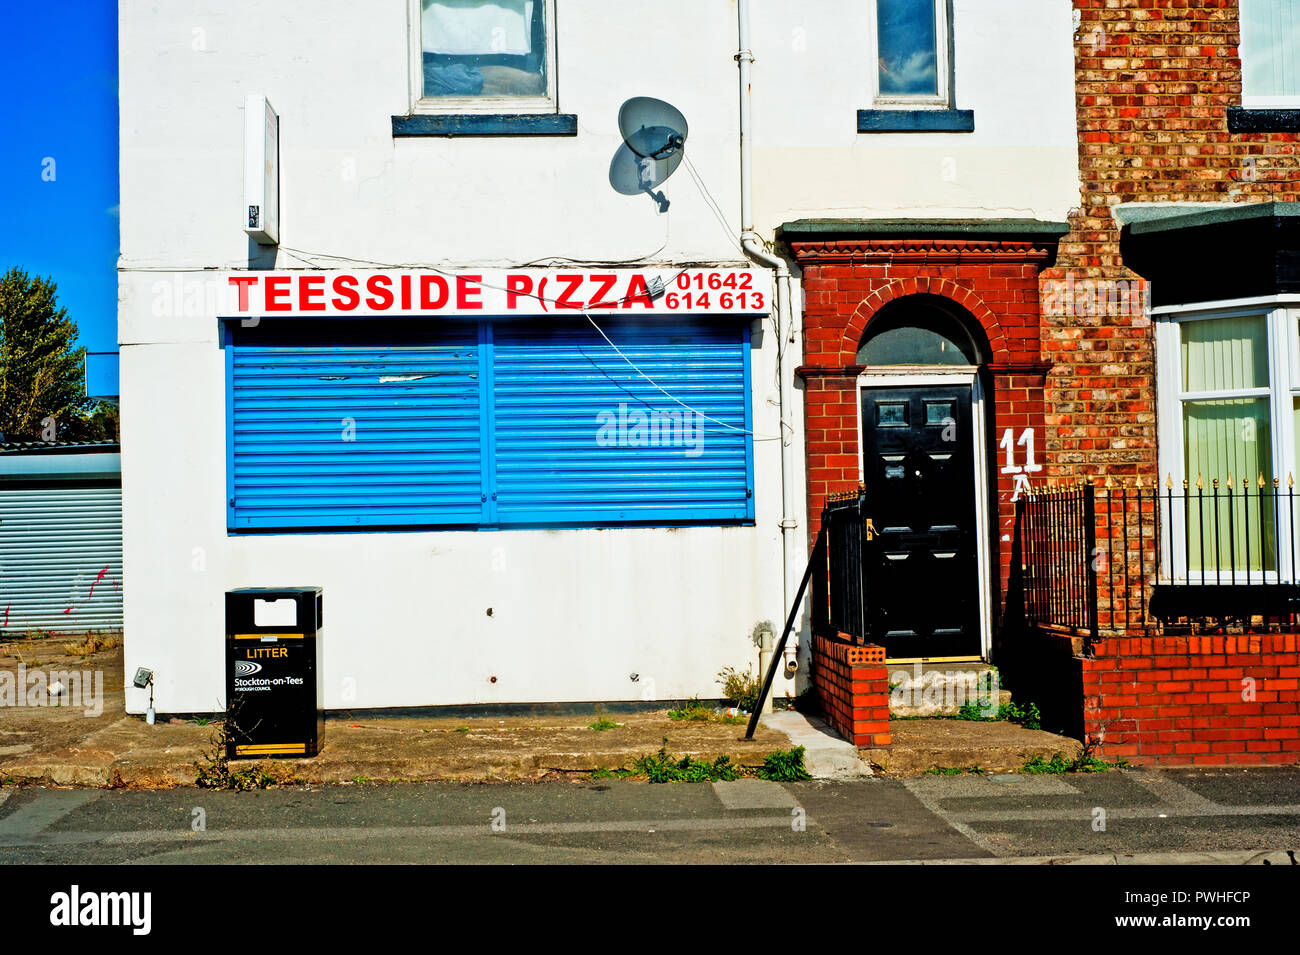 Pizza de Teesside, Portrack, Stockton on Tees, Cleveland, Angleterre Banque D'Images